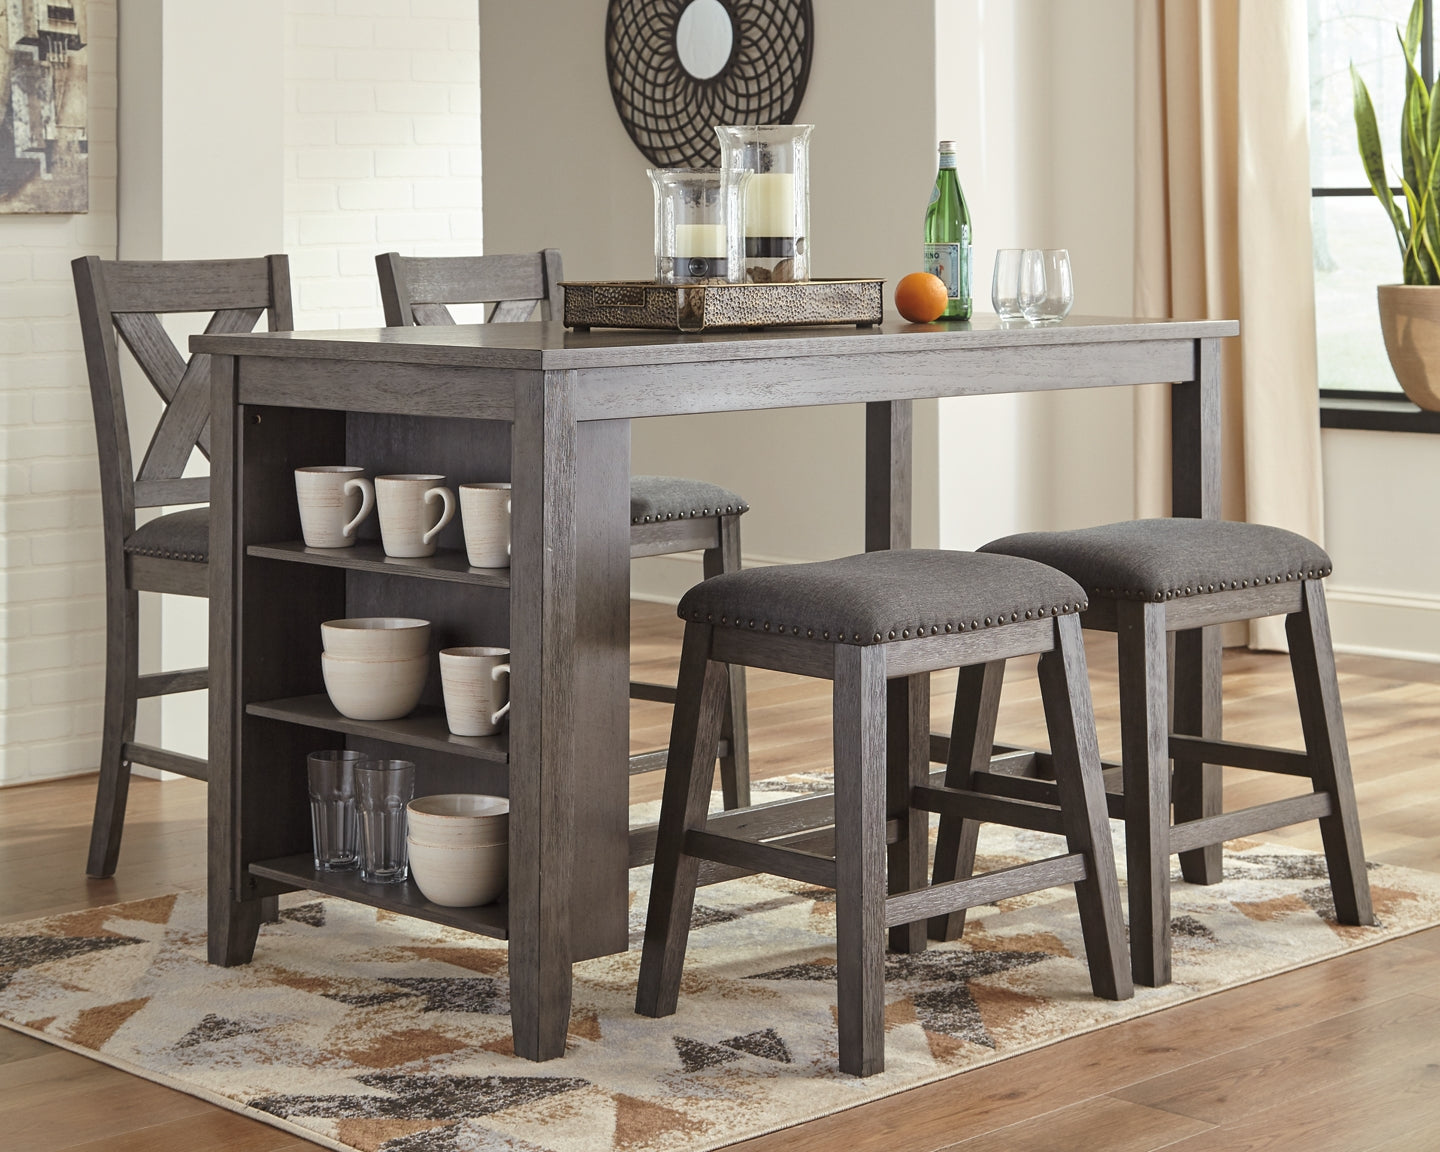 Caitbrook Counter Height Dining Table and 4 Barstools at Walker Mattress and Furniture Locations in Cedar Park and Belton TX.